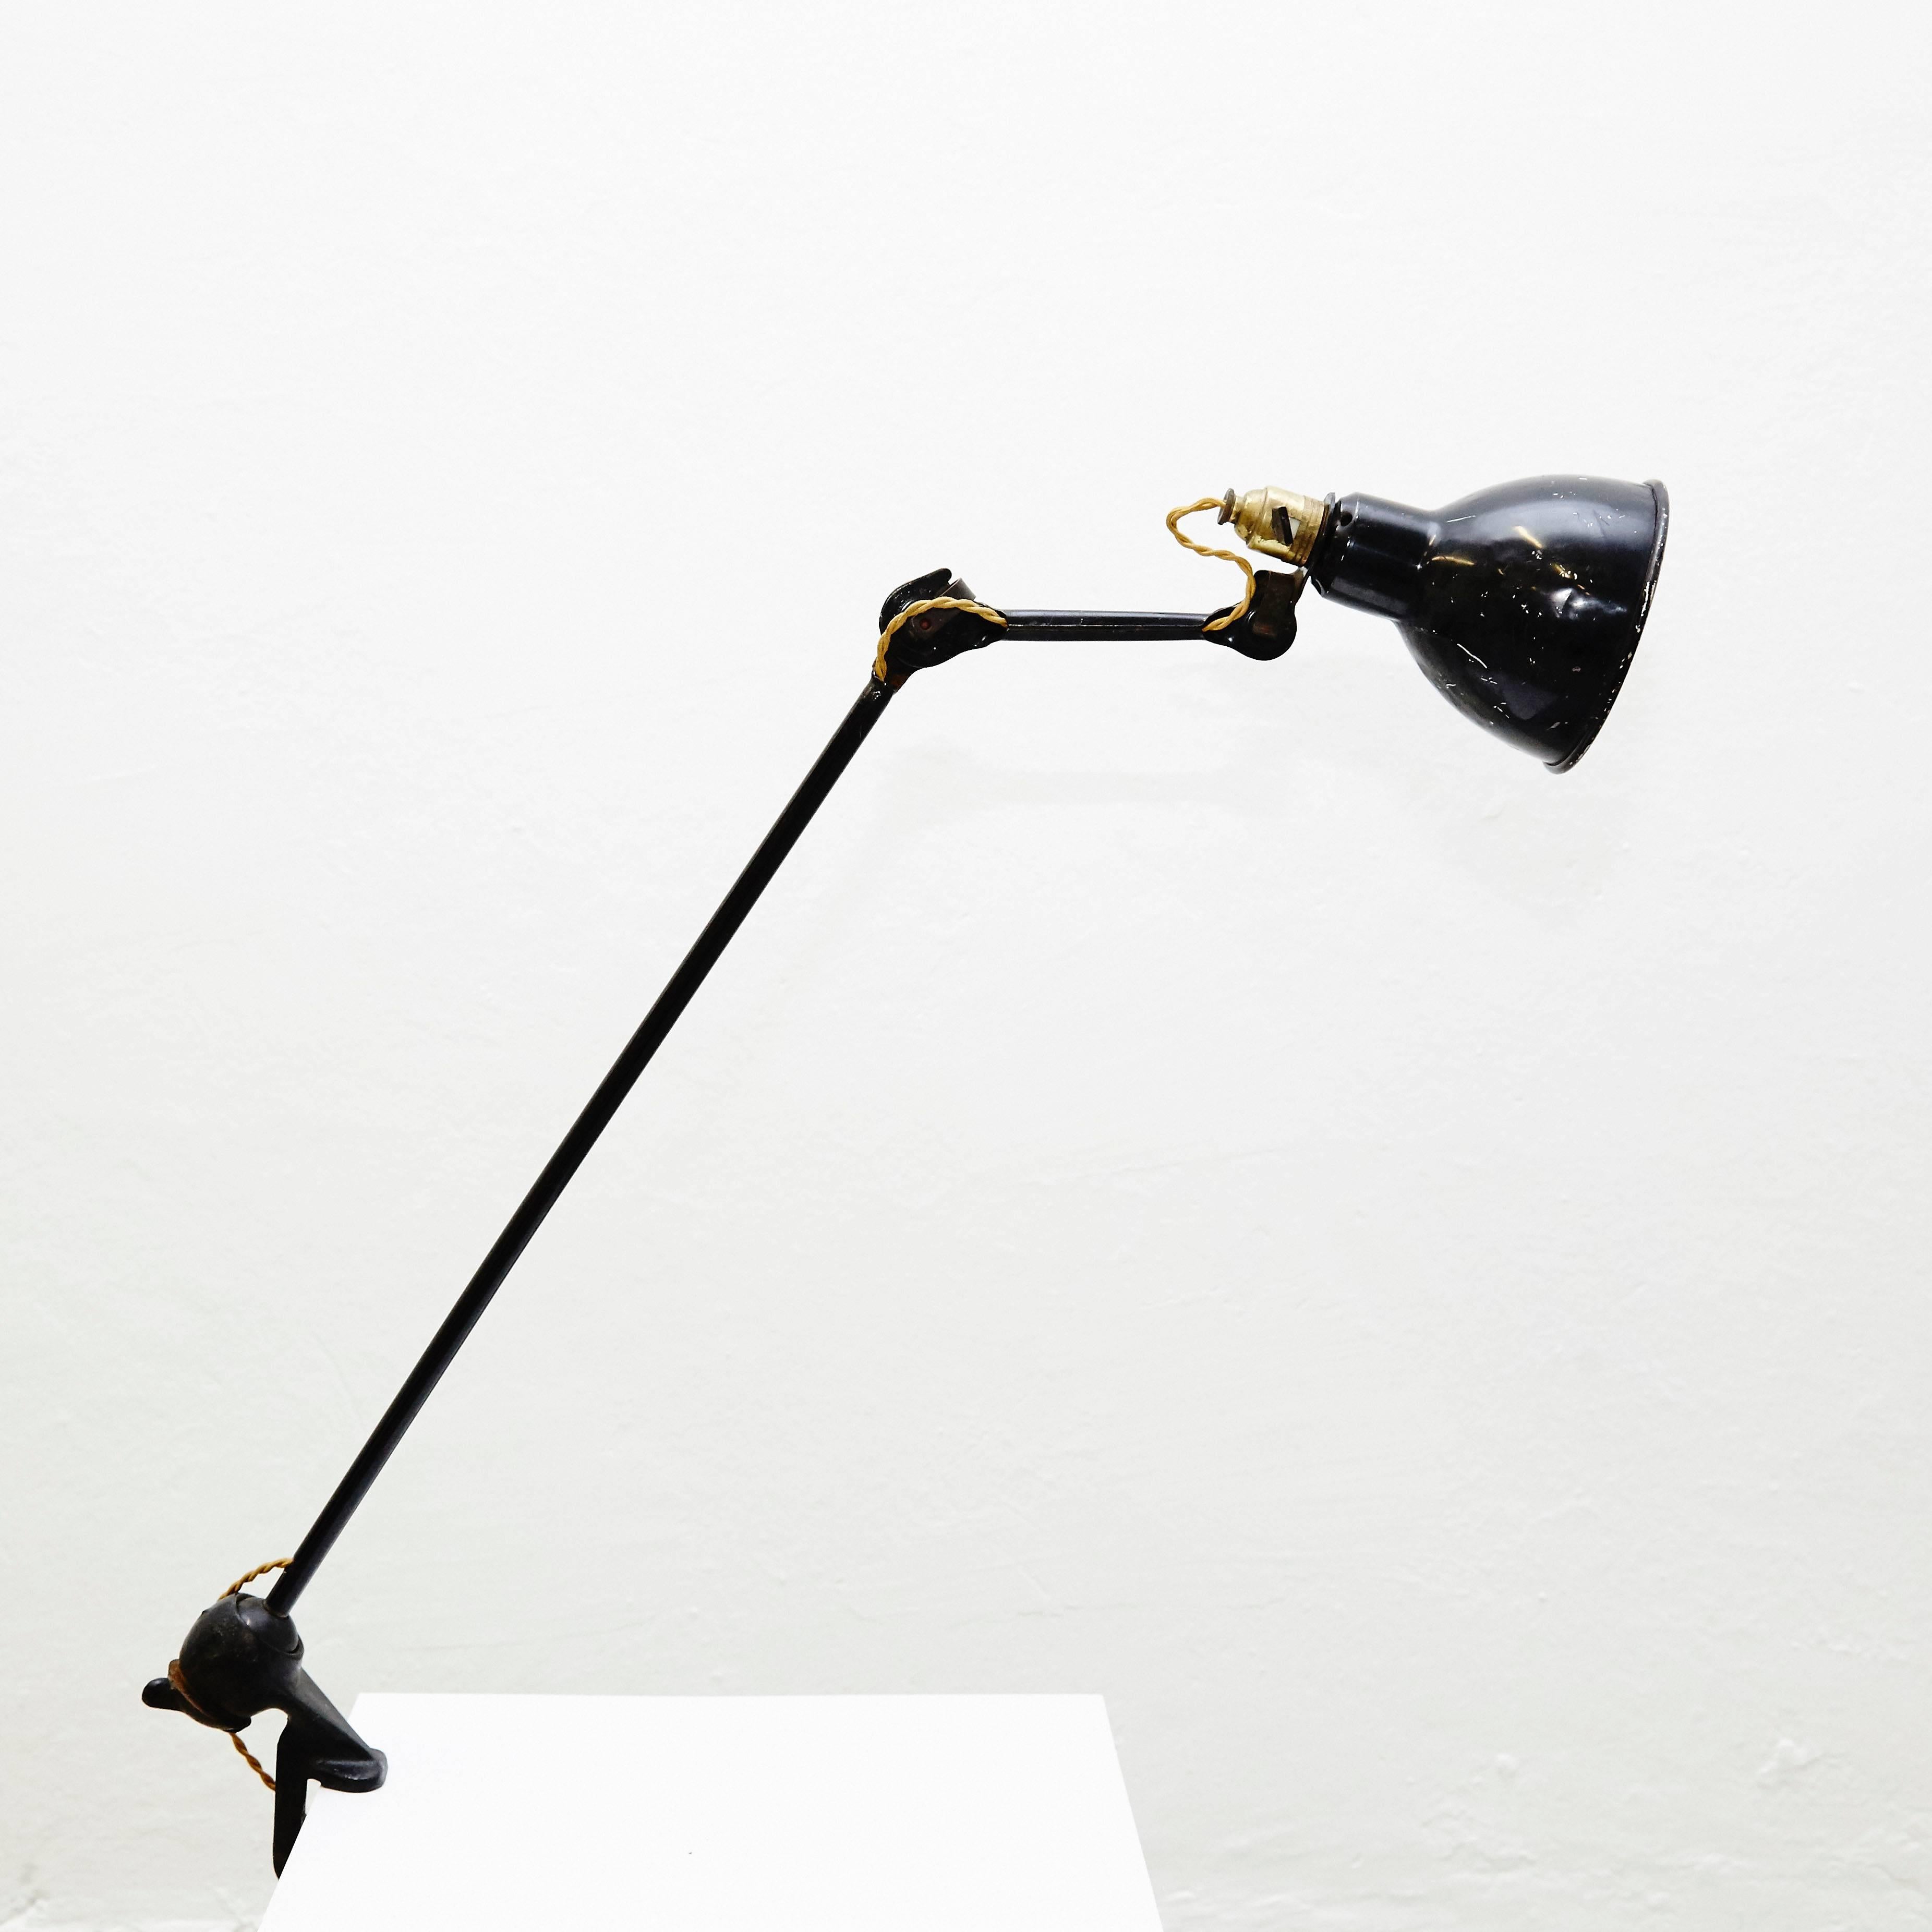 Table lamp designed by Bernard-Albin Gras.
Manuactured by Gras (France), circa 1930.
Aluminium and steel.

In good original condition, with minor wear consistent with age and use, preserving a beautiful patina.

In 1922 Bernard-Albin Gras